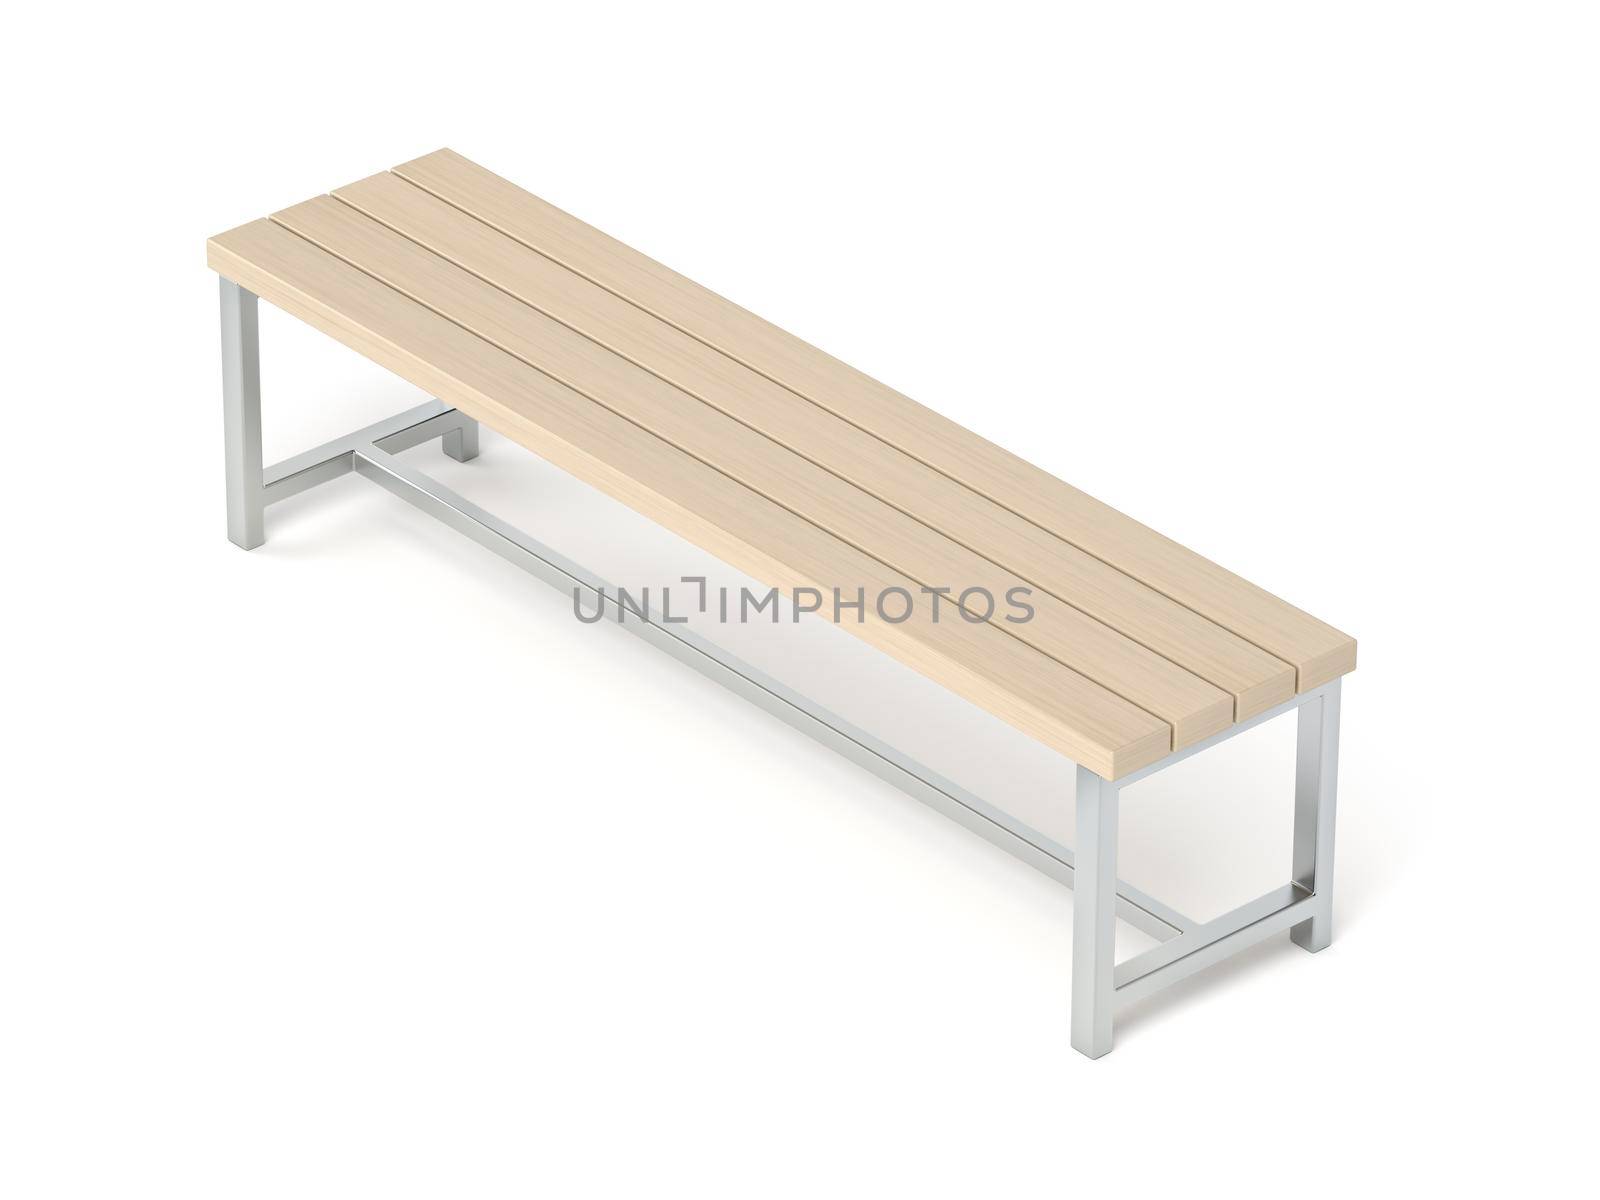 Outdoor wood bench by magraphics